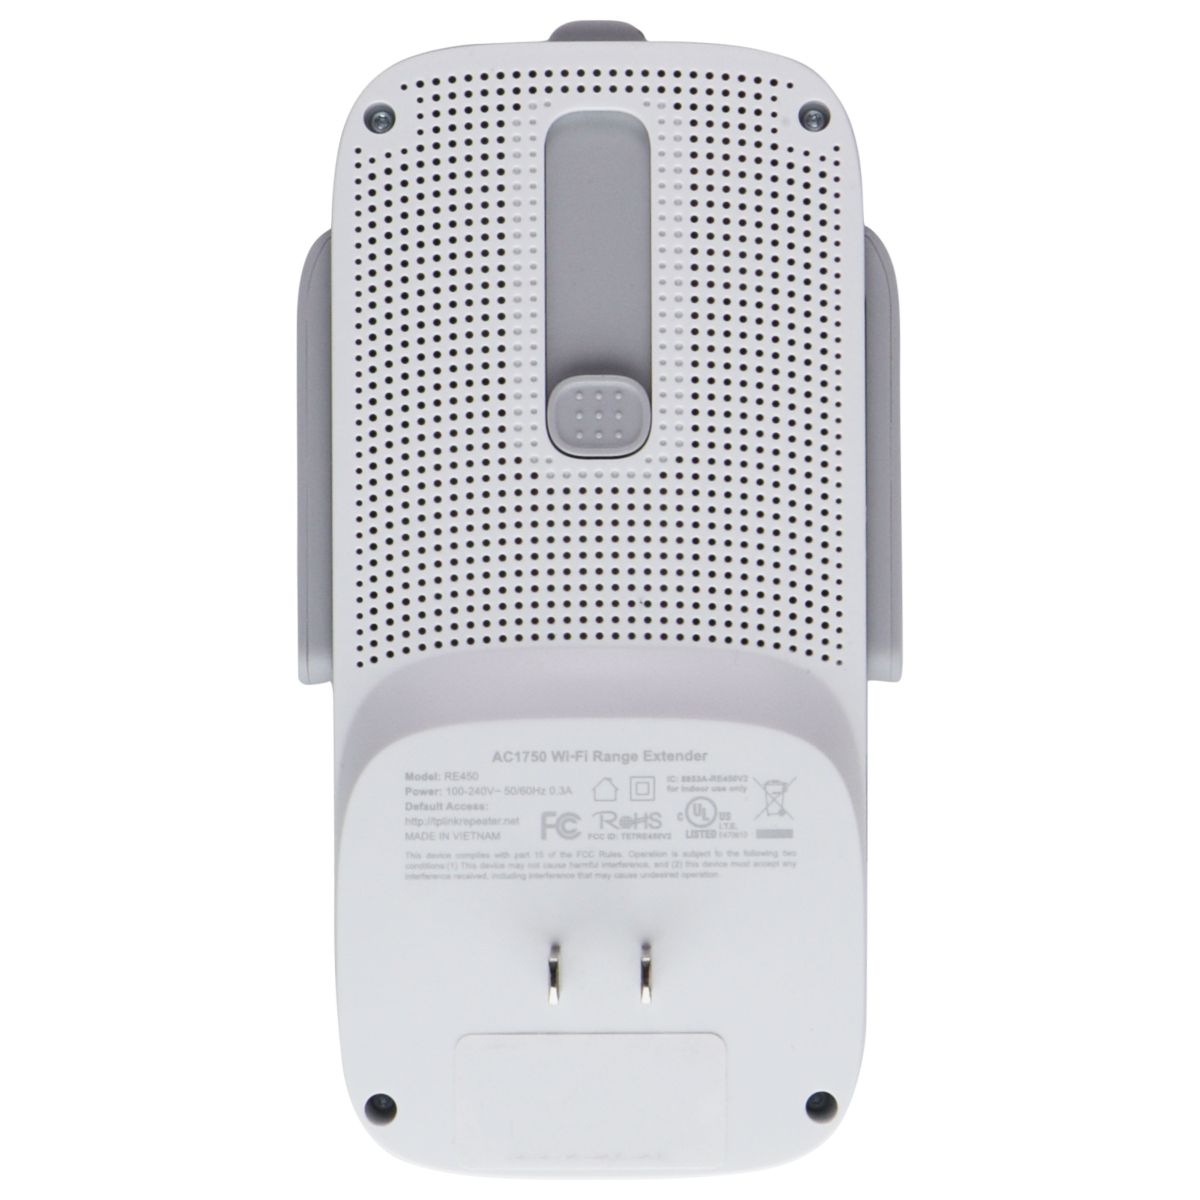 TP-LINK AC1600 Wi-Fi Range Extender - White (RE400) Networking - Boosters, Extenders & Antennas TP-LINK    - Simple Cell Bulk Wholesale Pricing - USA Seller